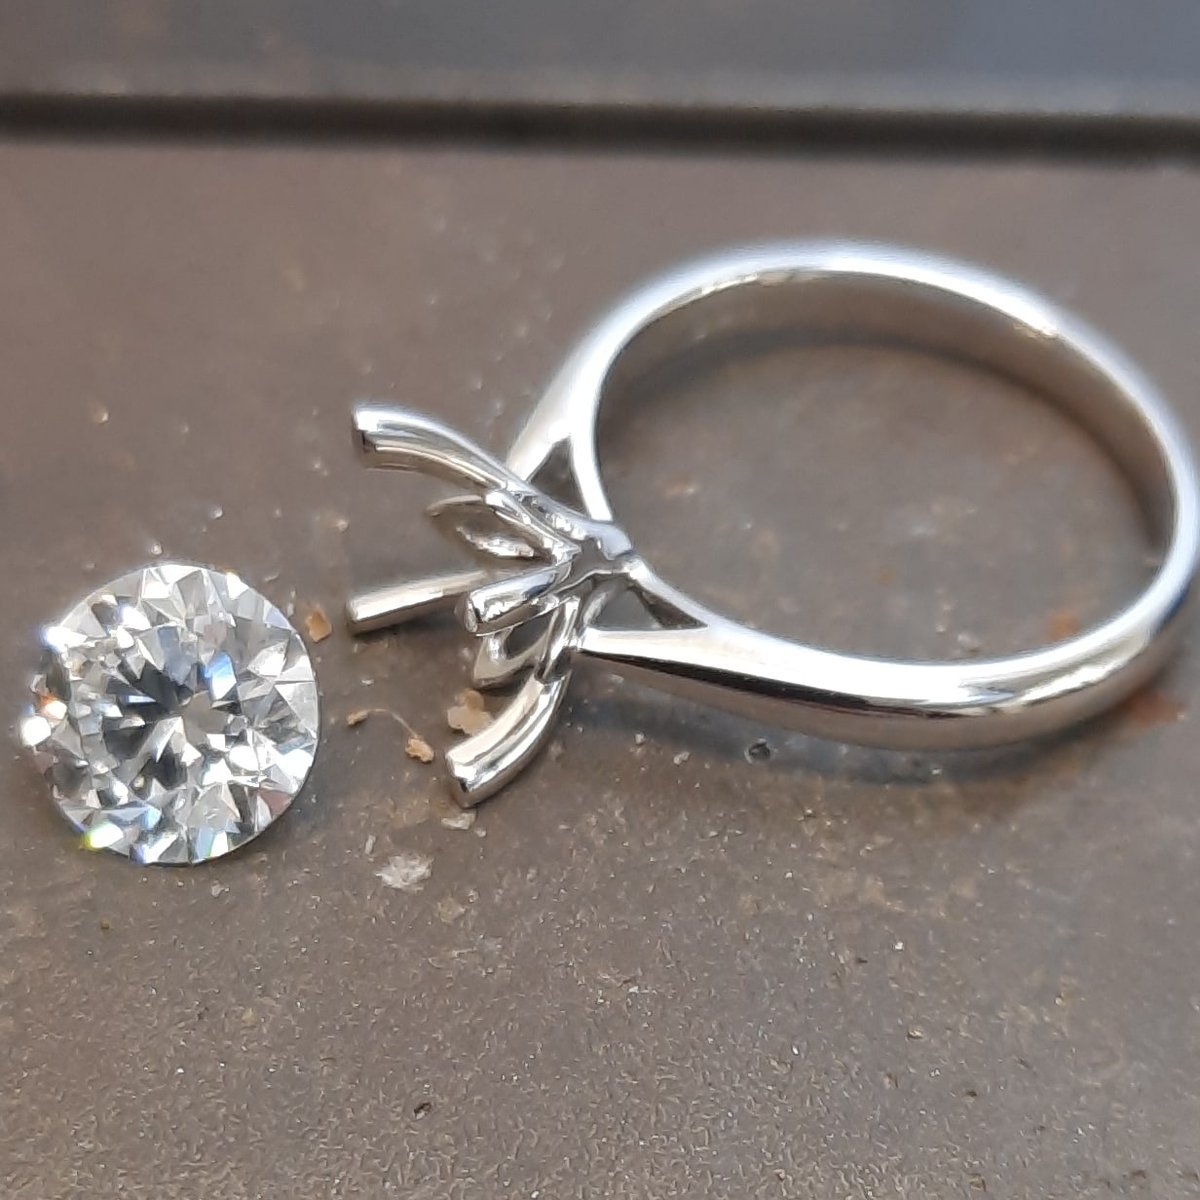 This 2.5ct lab grown diamond in a platinum ring is a customer order and will look amazing when finished.  #Elevenseshour #ShopQuirkyHour #SmartNetworking  #BizHour #inbizhour #CraftBizParty #UKGiftHour #Bizbubble #Dorchester #SBS #labgrowndiamond